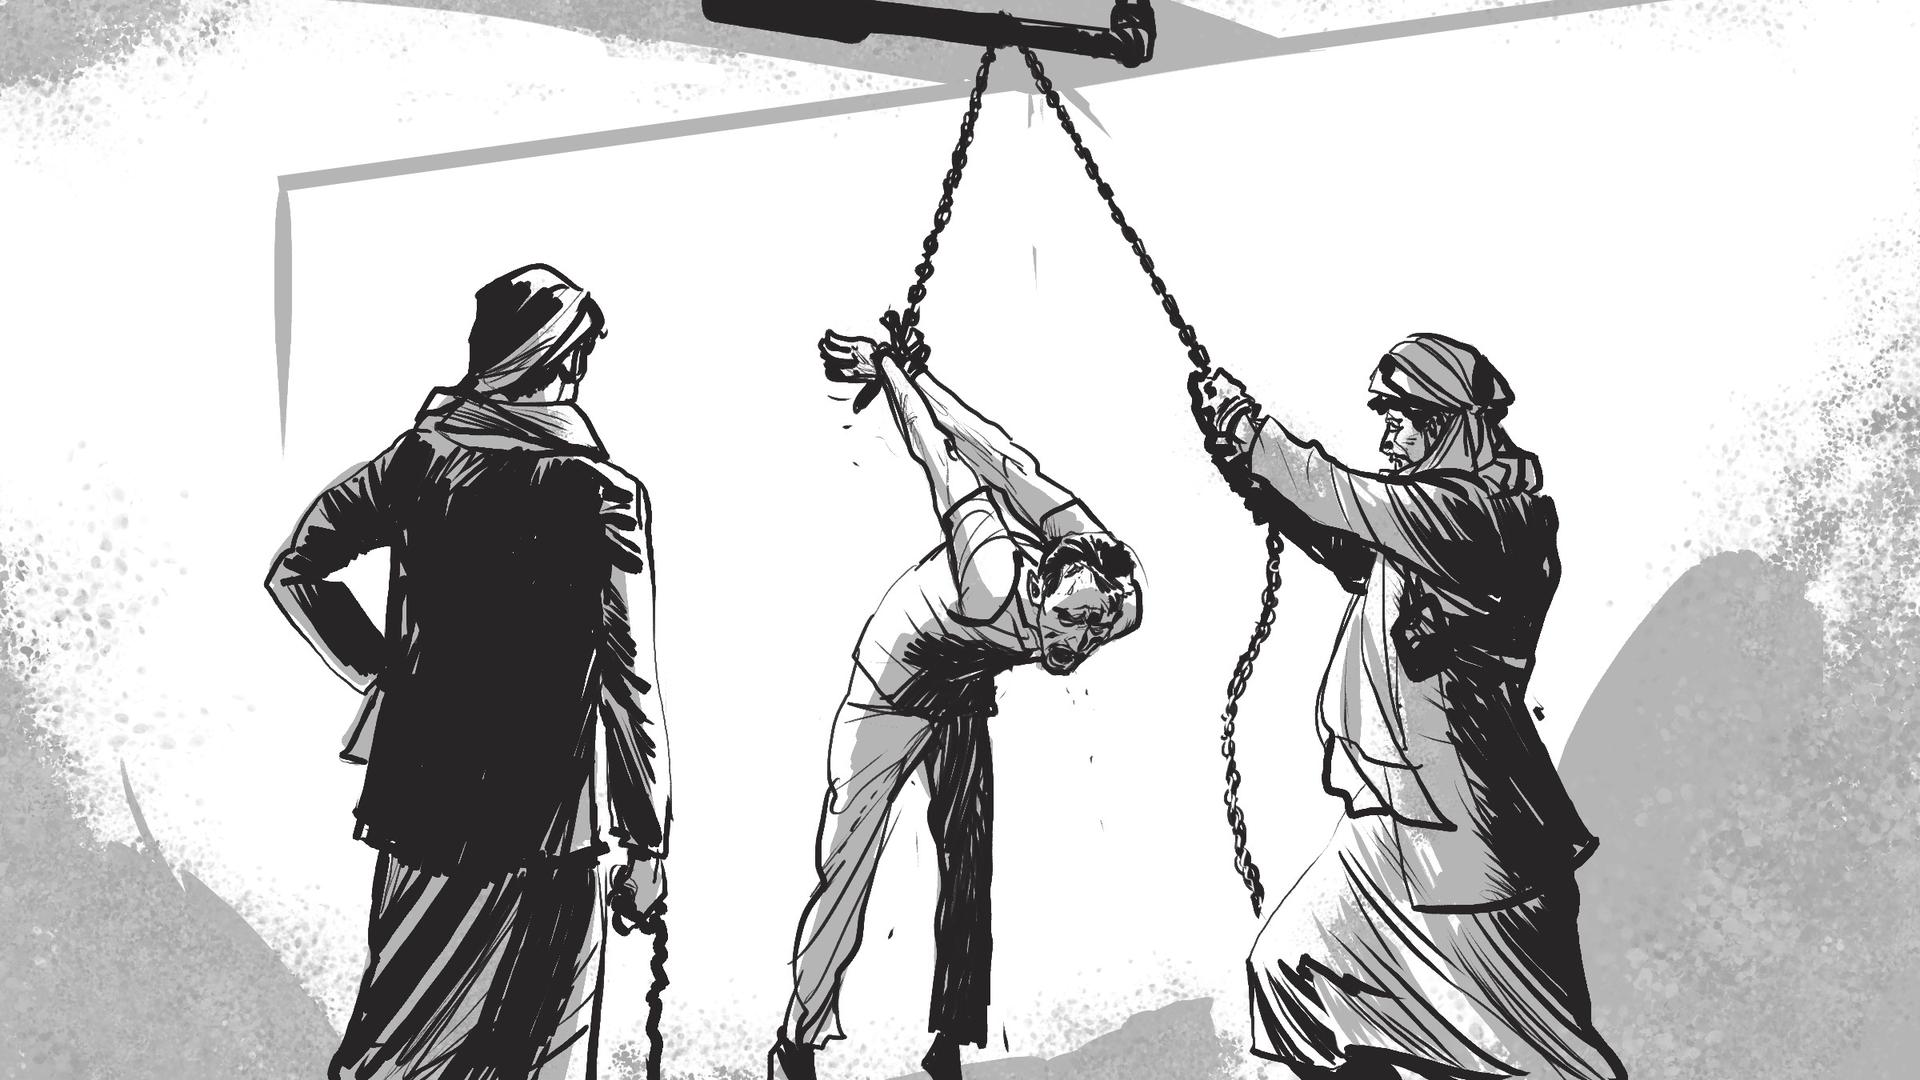 Houthi officials have treated detainees brutally, often amounting to torture. Former detainees described being hung from a wall by their arms shackled behind them as one of the most painful techniques. © 2018 John Holmes for Human Rights Watch